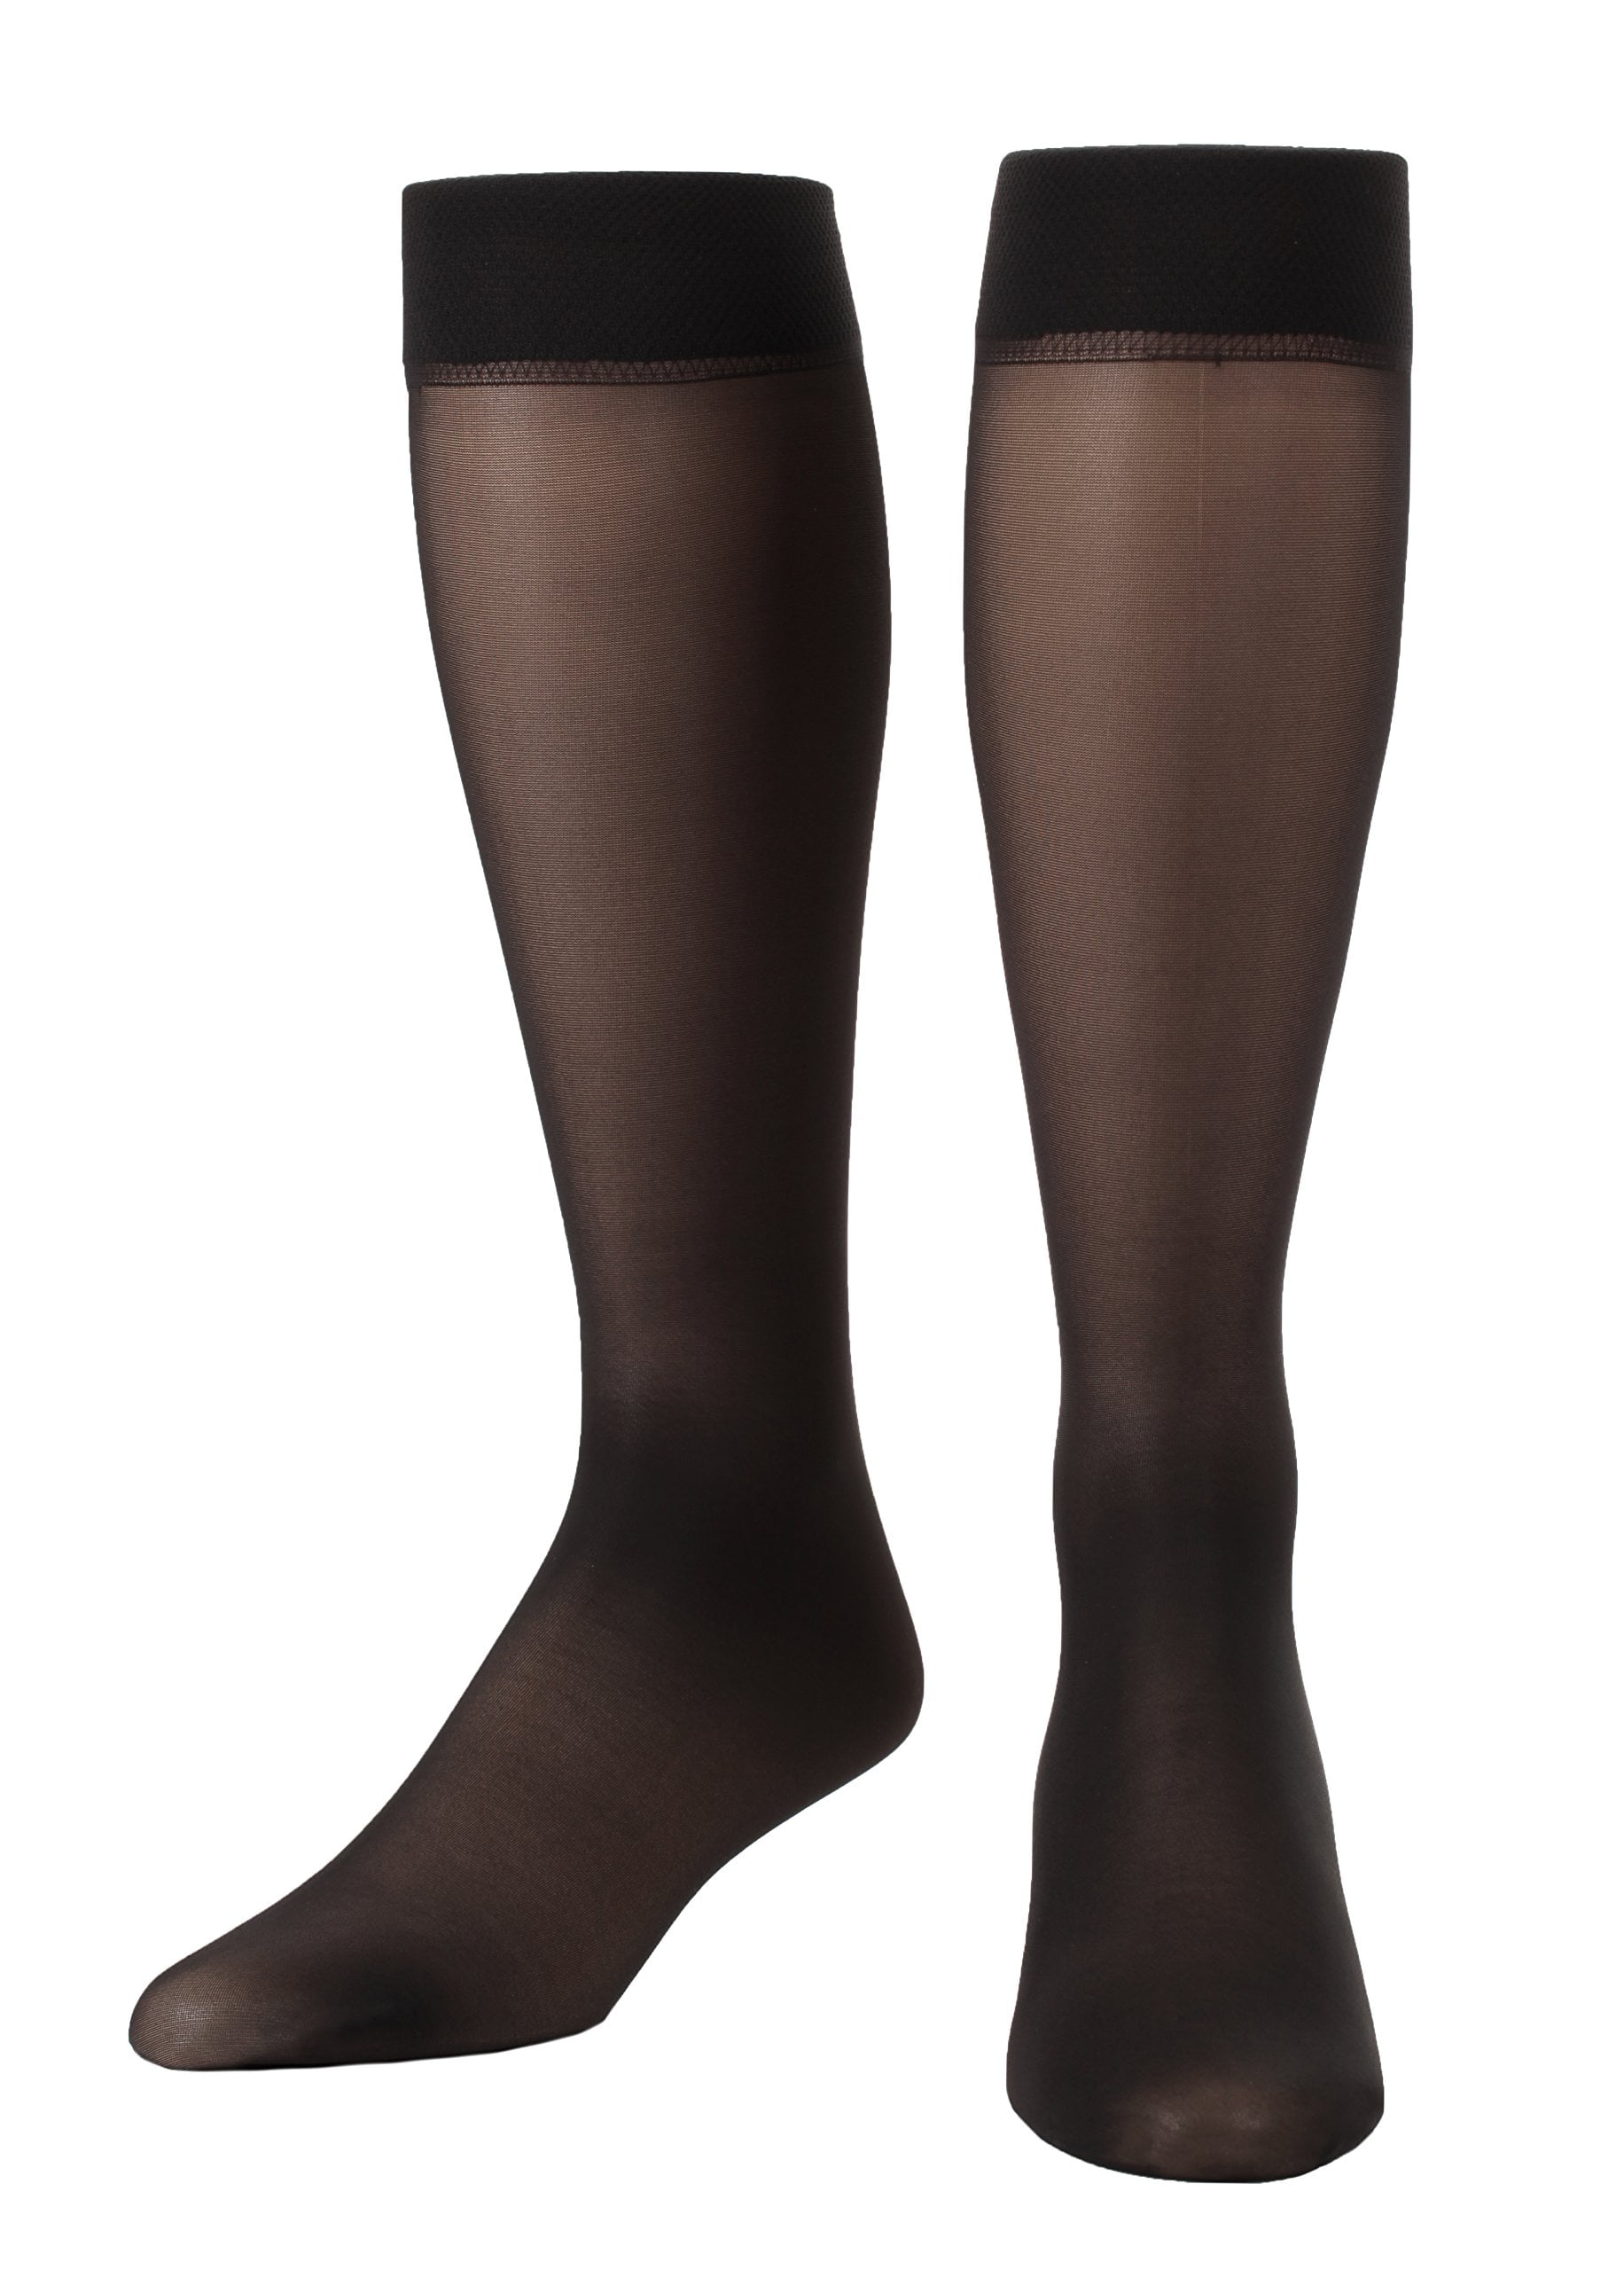 Sheer Compression Knee Highs, Made in the USA Light Support Socks for ...